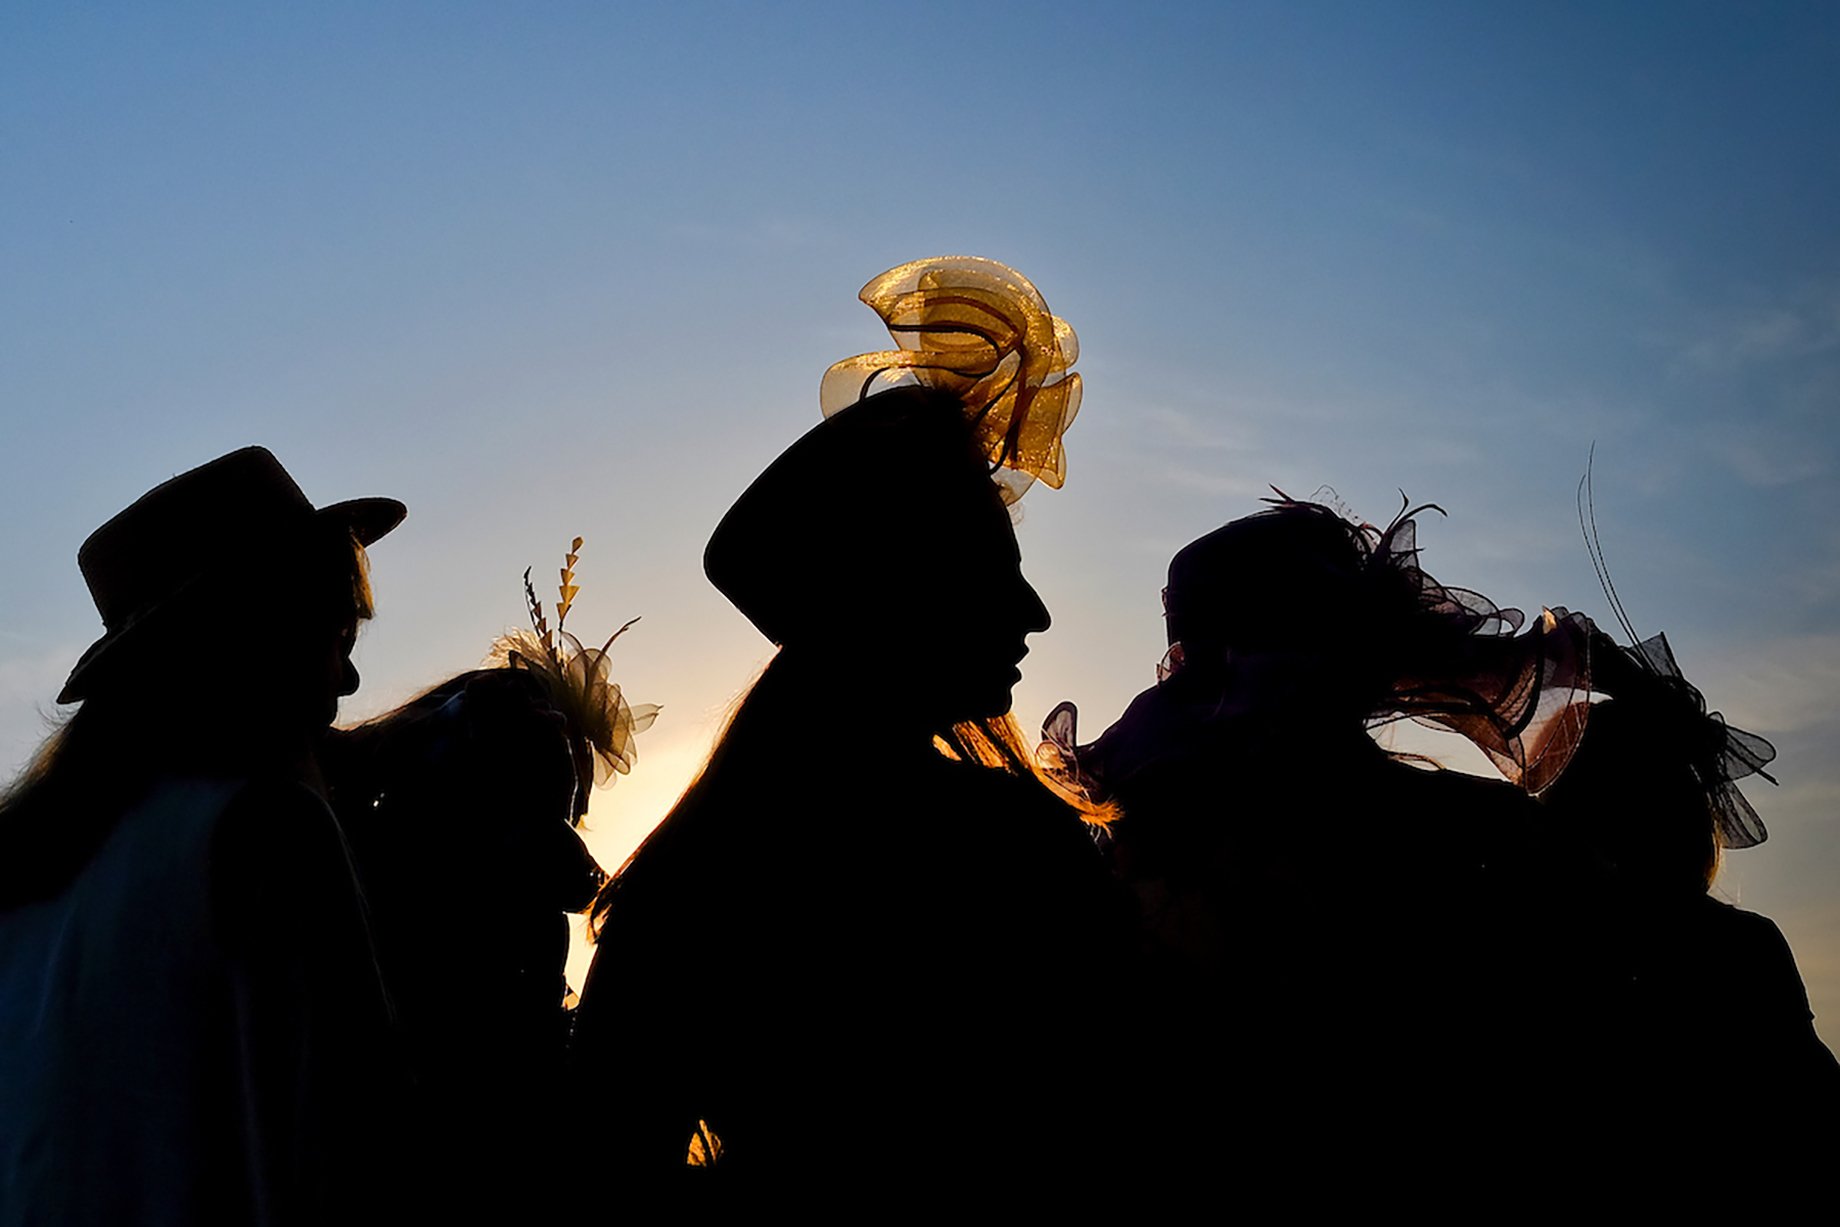 Women with fluffy hats silhouetted in front of a sunset at Churchill Downs shot by William DeShazer